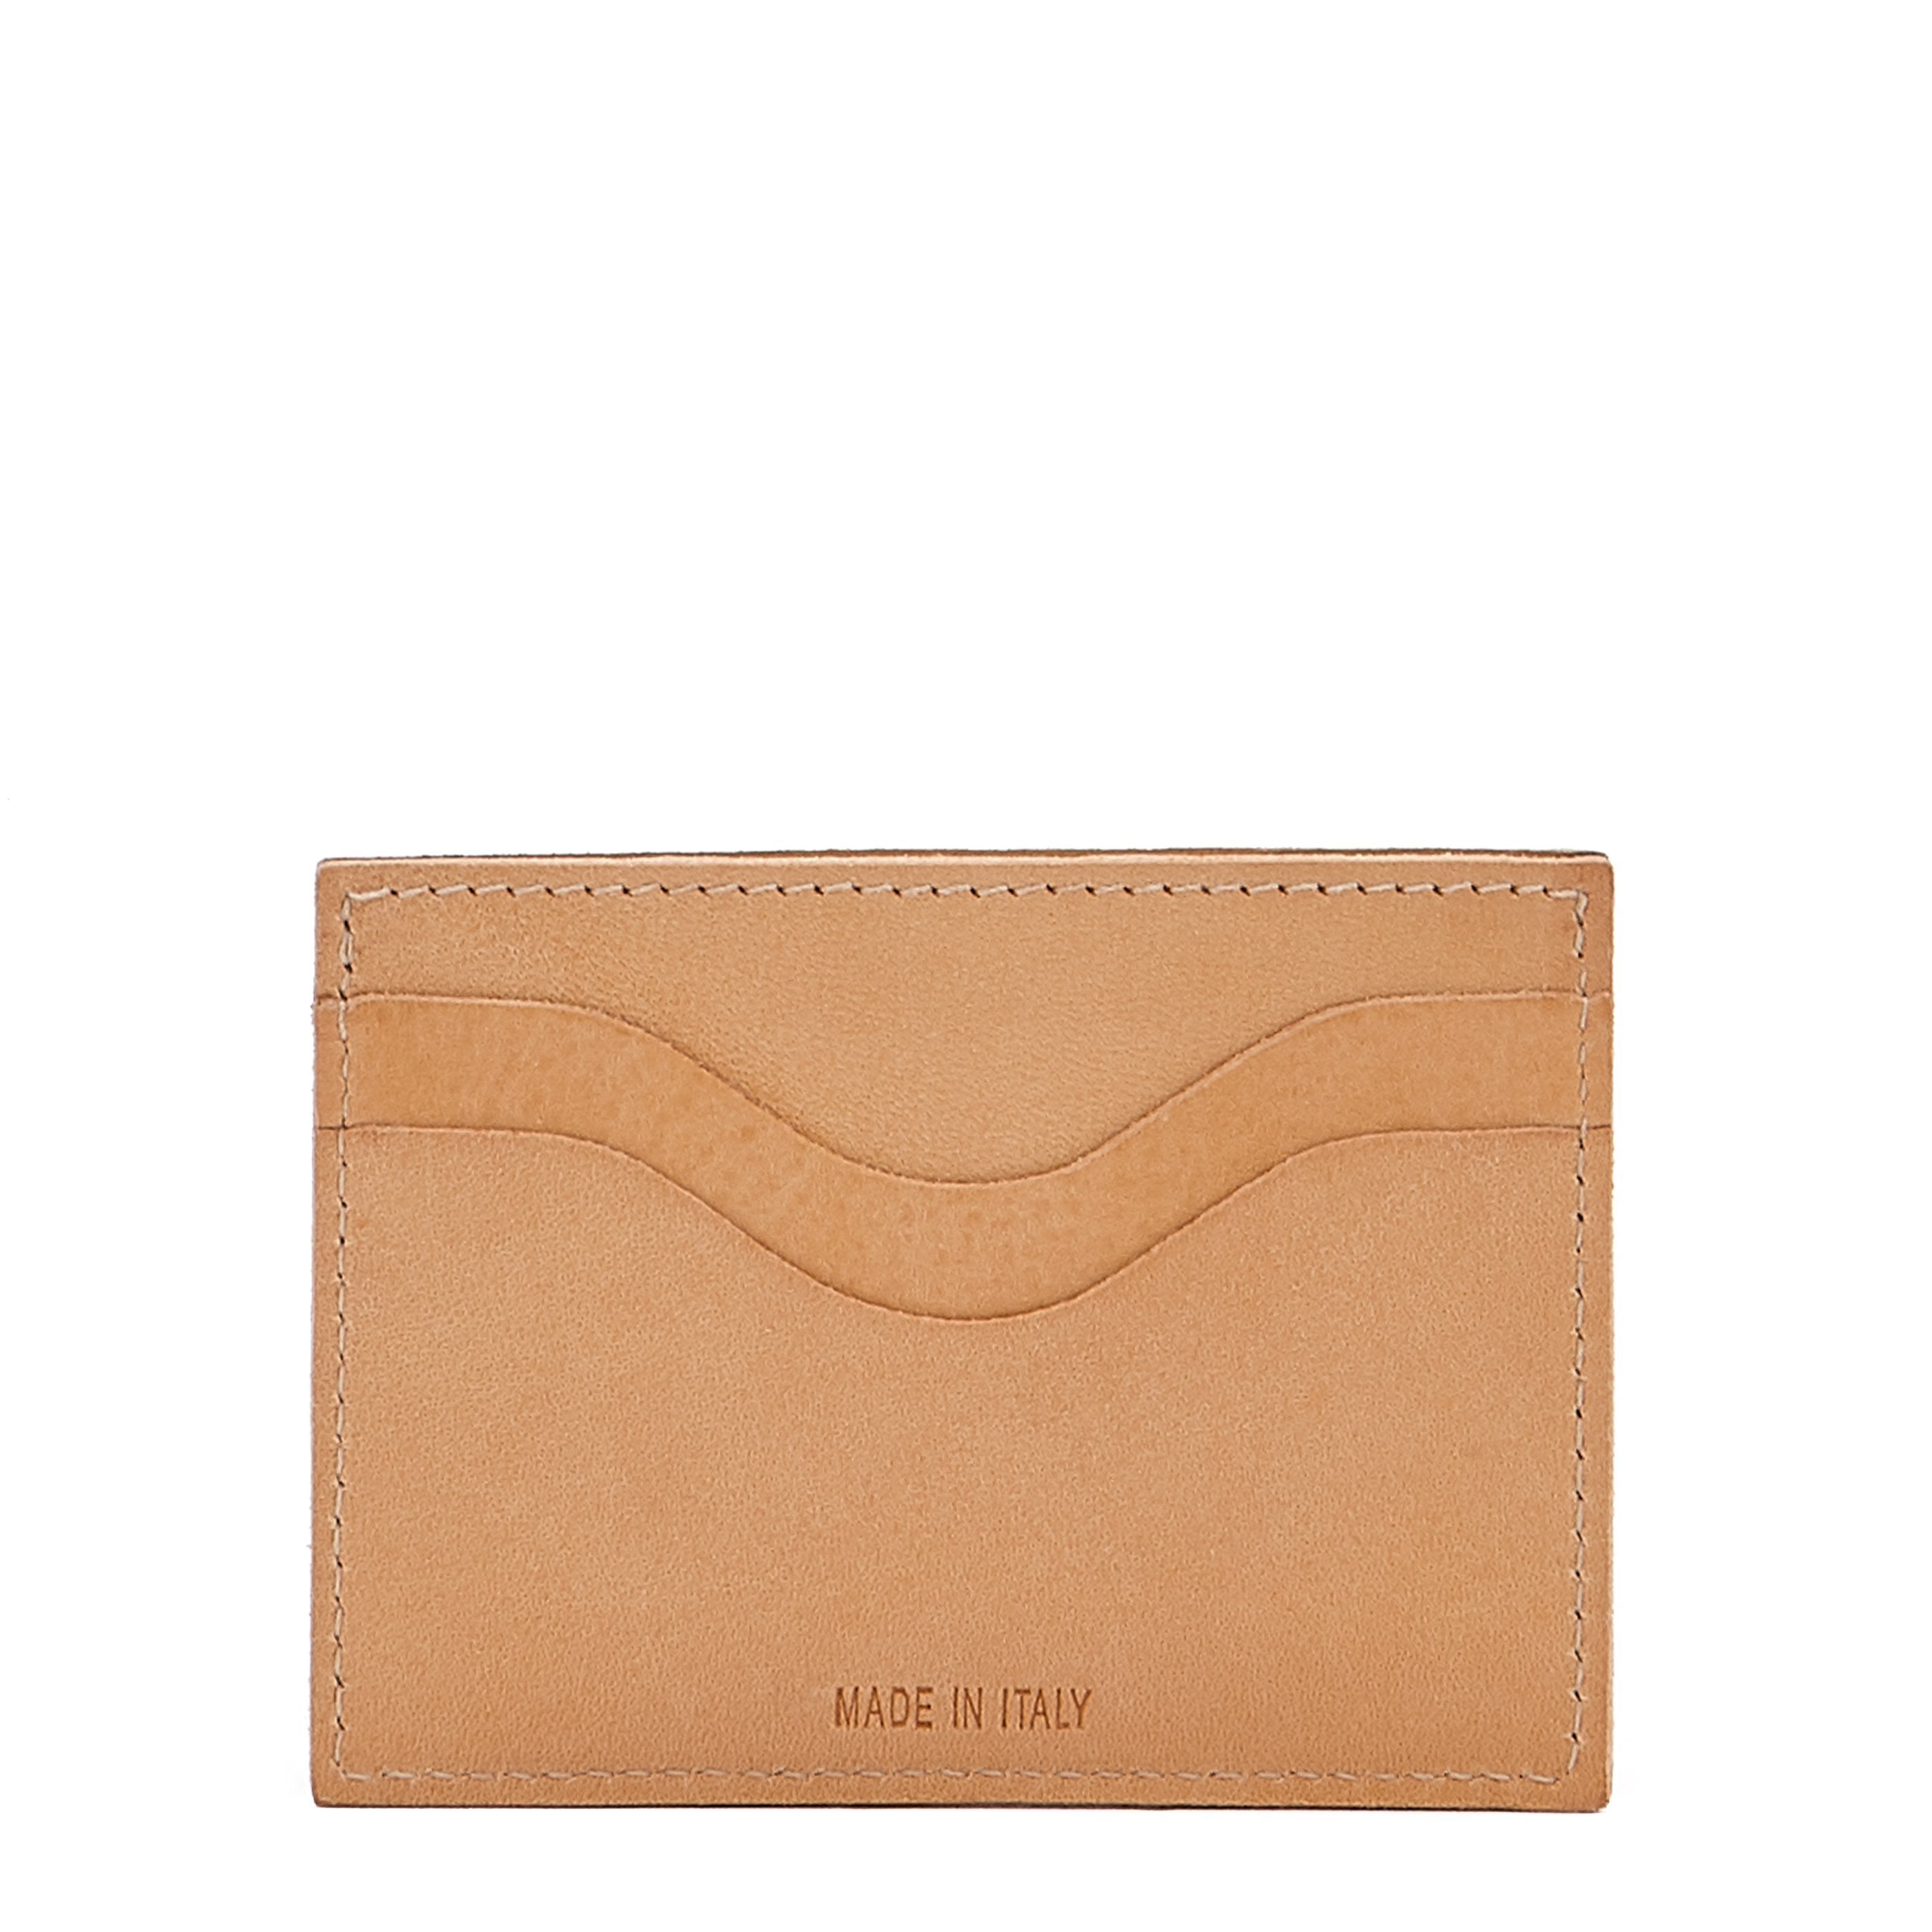 Oliveta  Women's Small Wallet in Leather color Natural – Il Bisonte